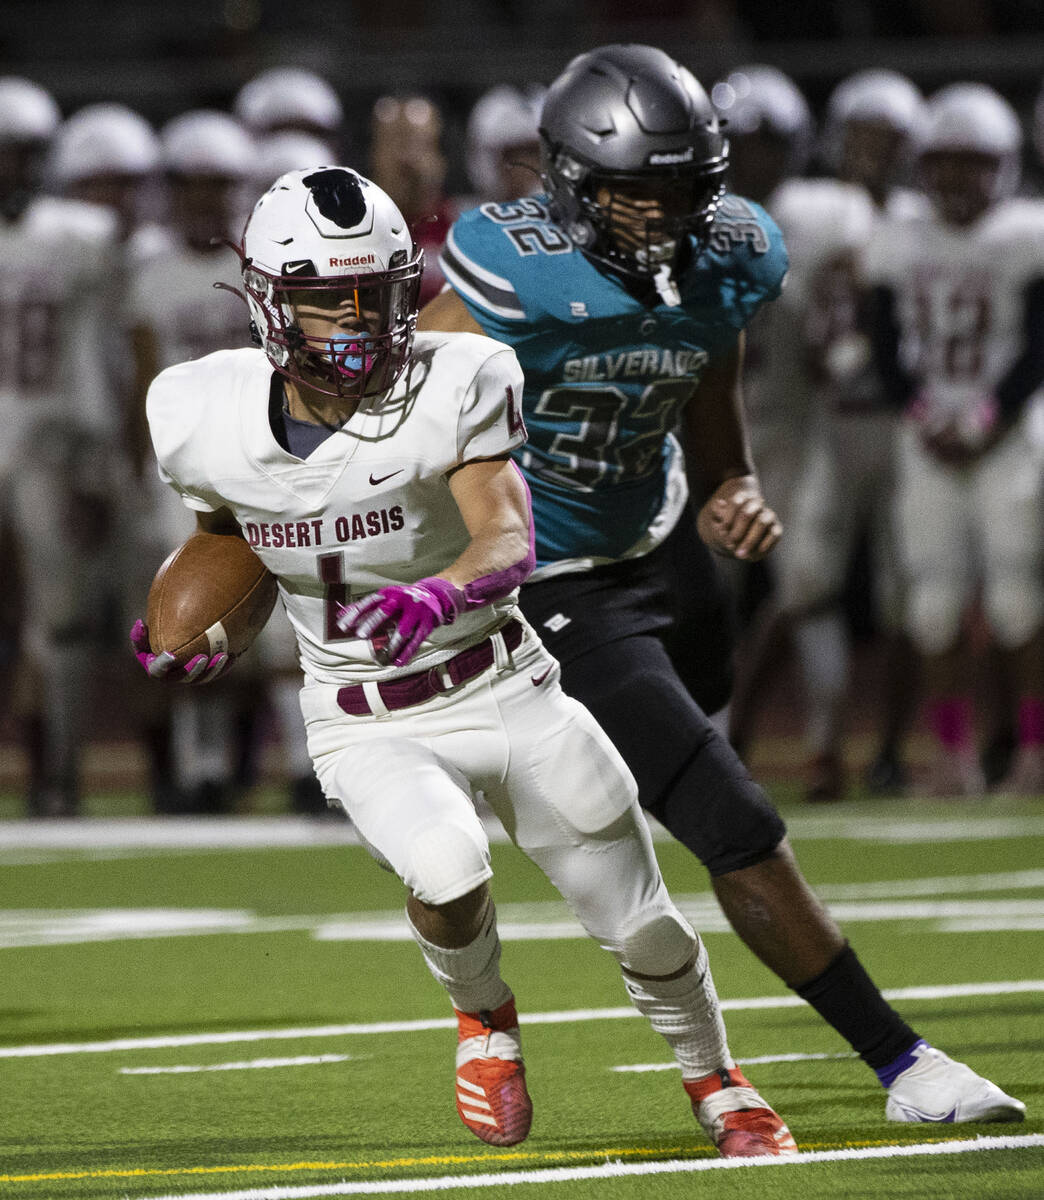 Desert Oasis wide receiver Isaiah Flasher (4) runs with the ball during the first half of a foo ...